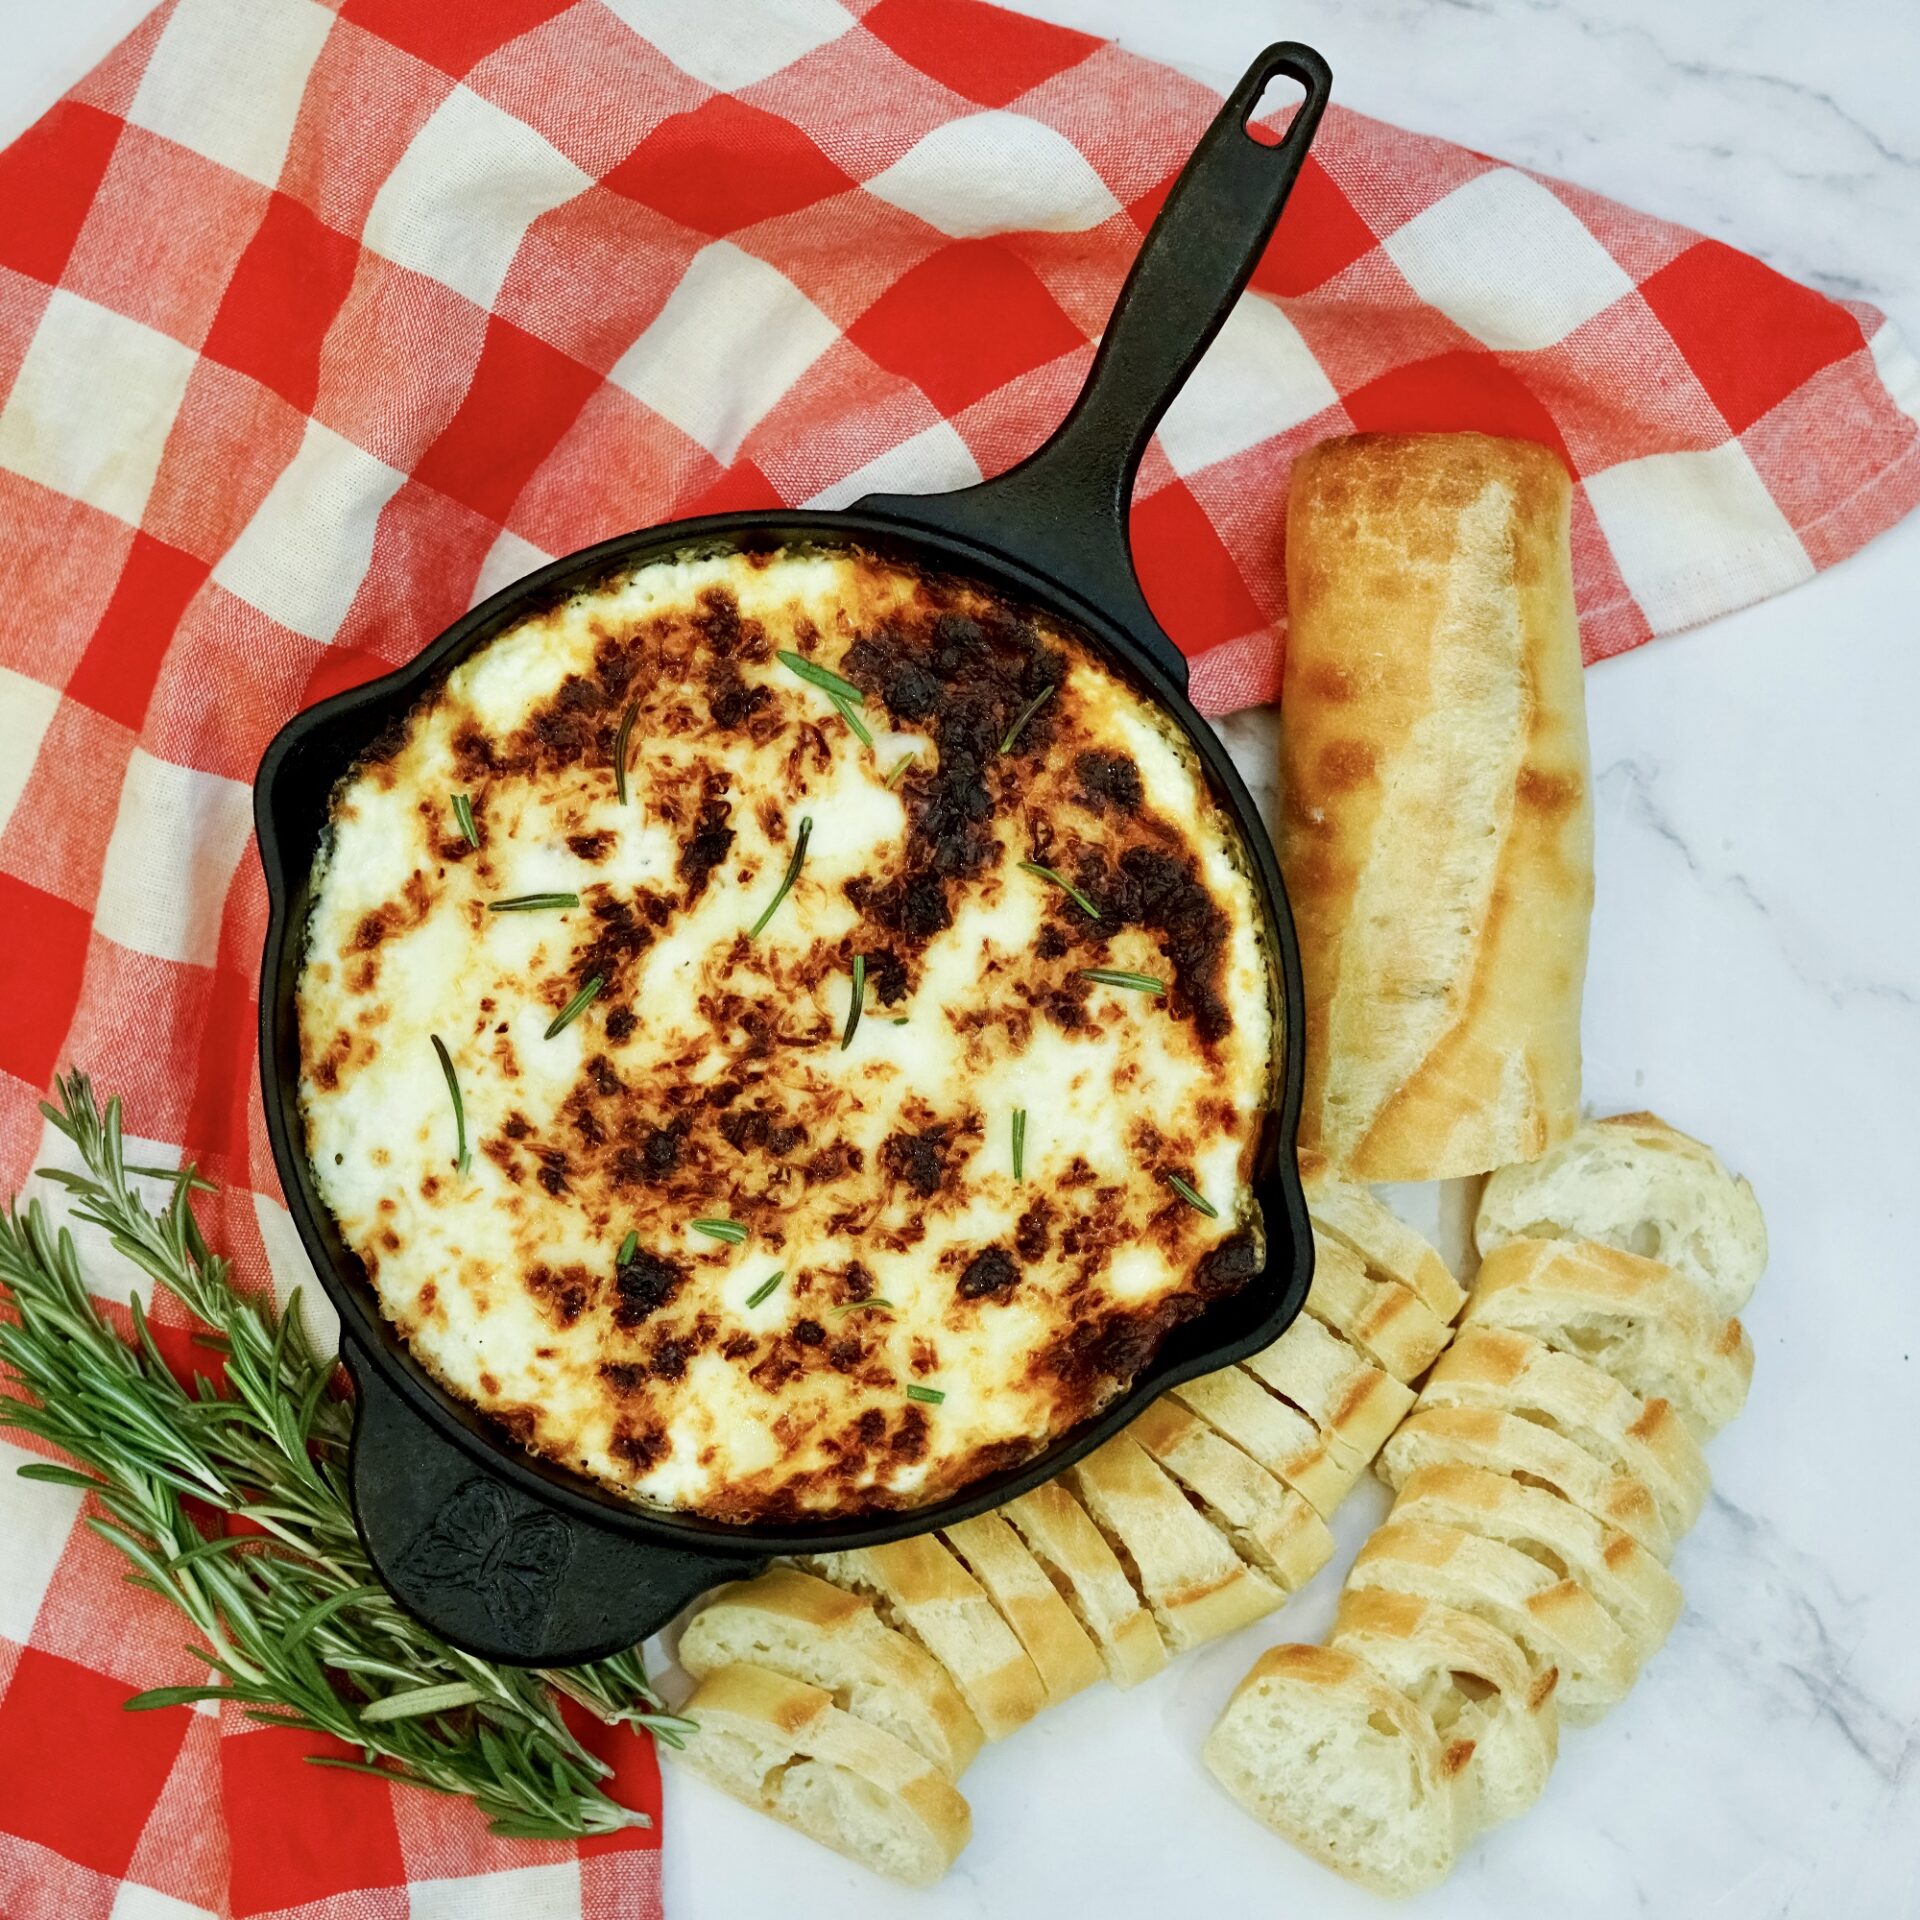 Baked ricotta dip on a counter with bread and rosemary.